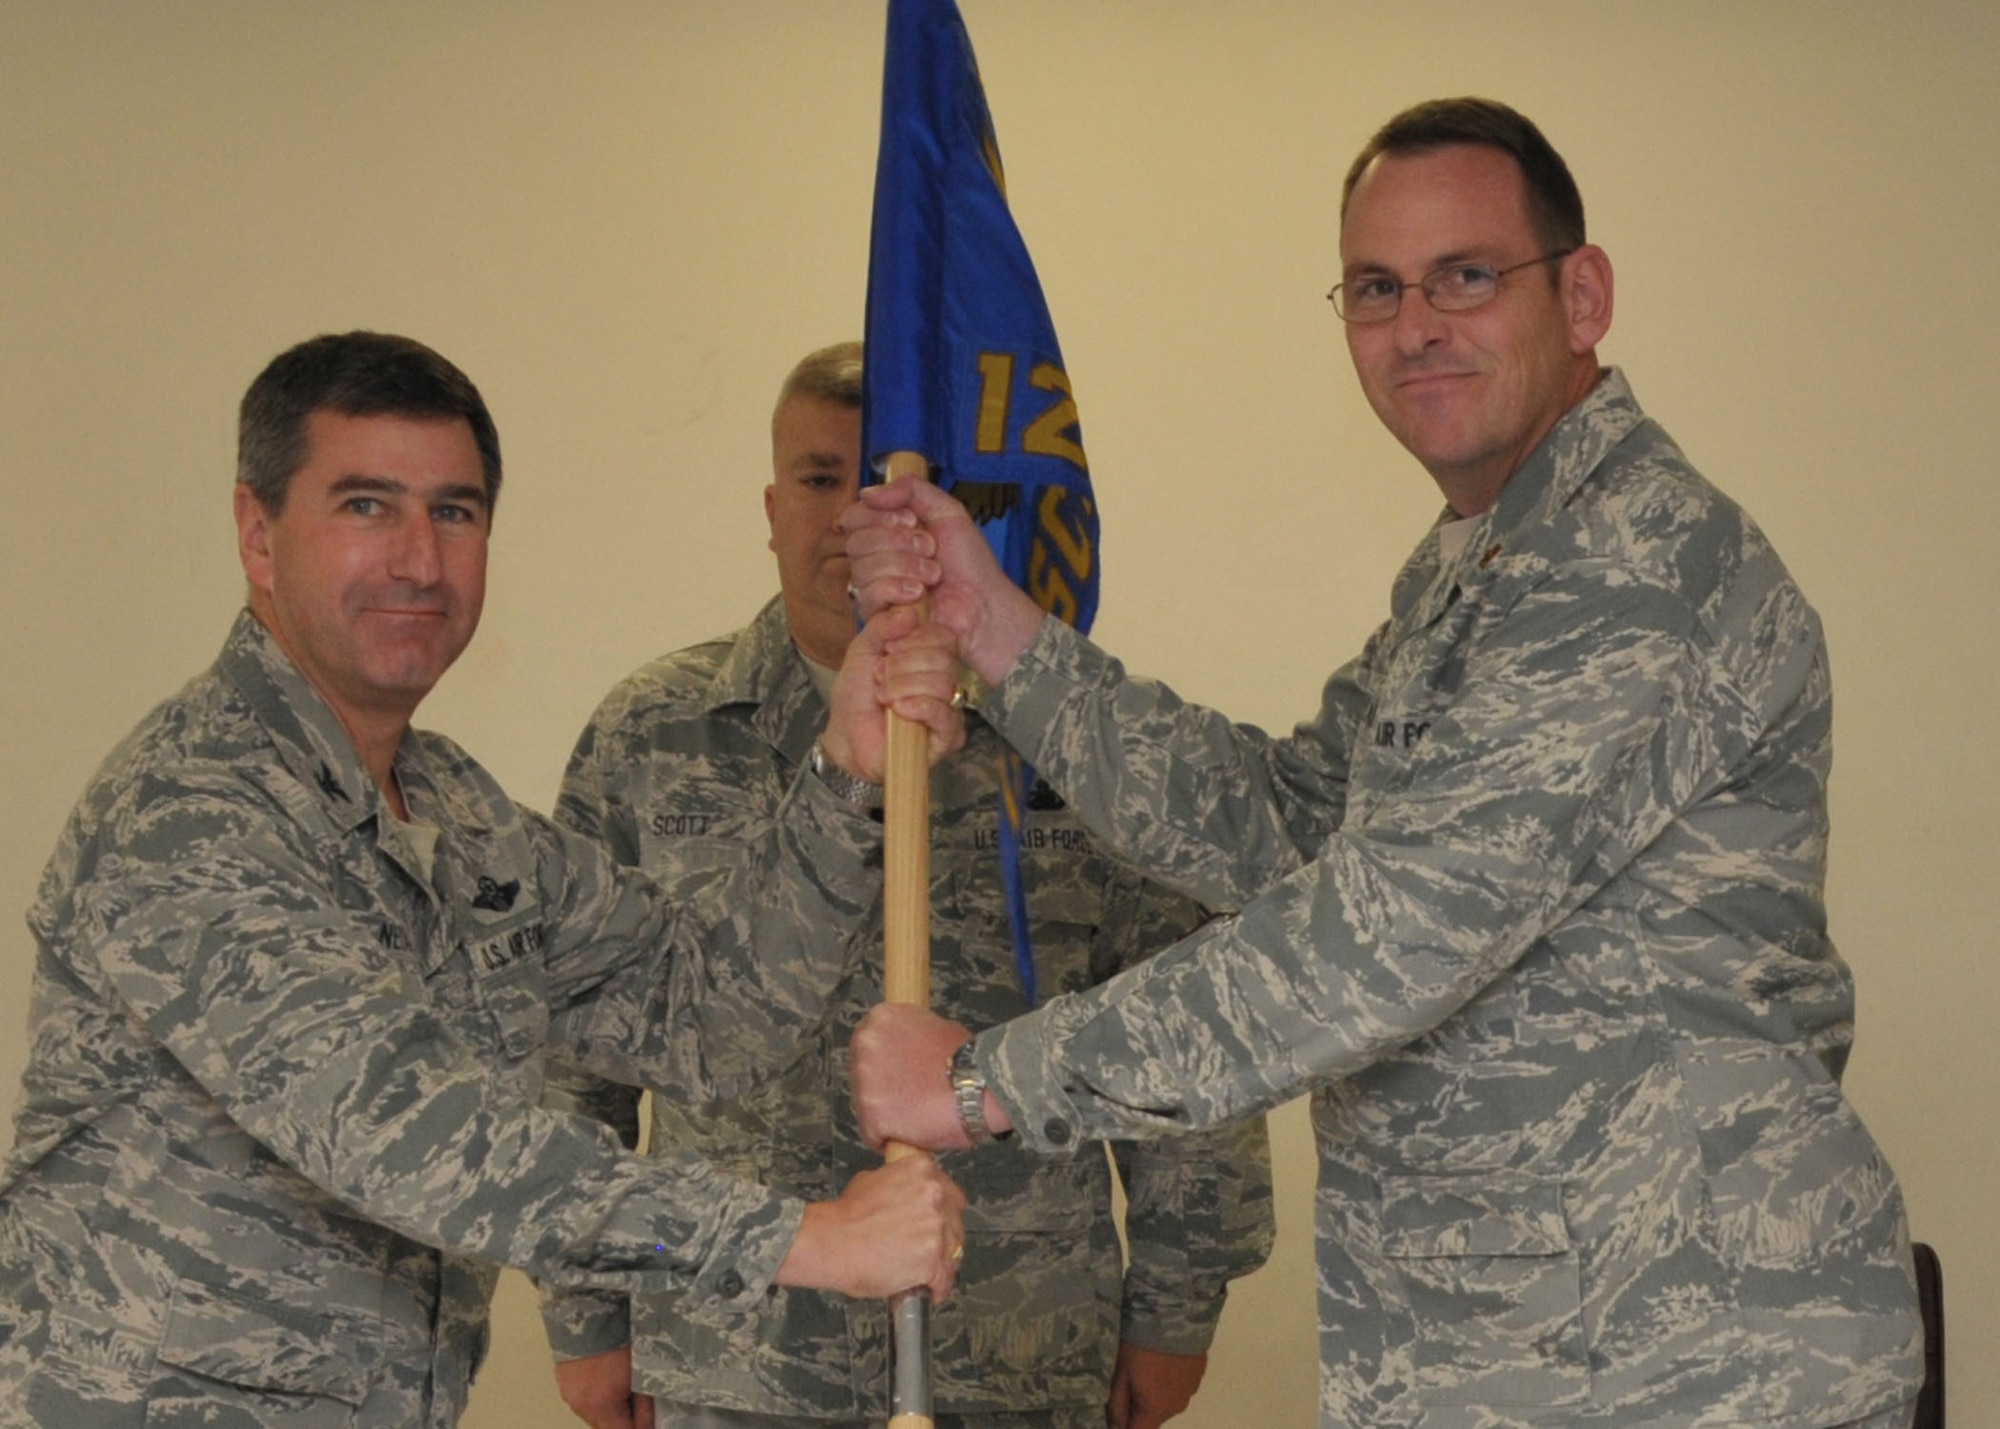 Maj. Evan Cozadd (right) accepts the 126th Supply Chain Management Squadron guidon from Col. Peter Nezamis, commander, 126th Air Refueling Wing, at Scott AFB, Ill., on Nov. 5, 2011. Maj. Cozadd brings more than 20 years of experience in the logistics arena and the Illinois Air National Guard with him to this position. The 126 SCMS is the 126 ARW’s Classic Associate Total Force Integration squadron embedded within the Active Duty Air Force Global Logistic Supply Center. (National Guard photo by Master Sgt. Franklin Hayes)